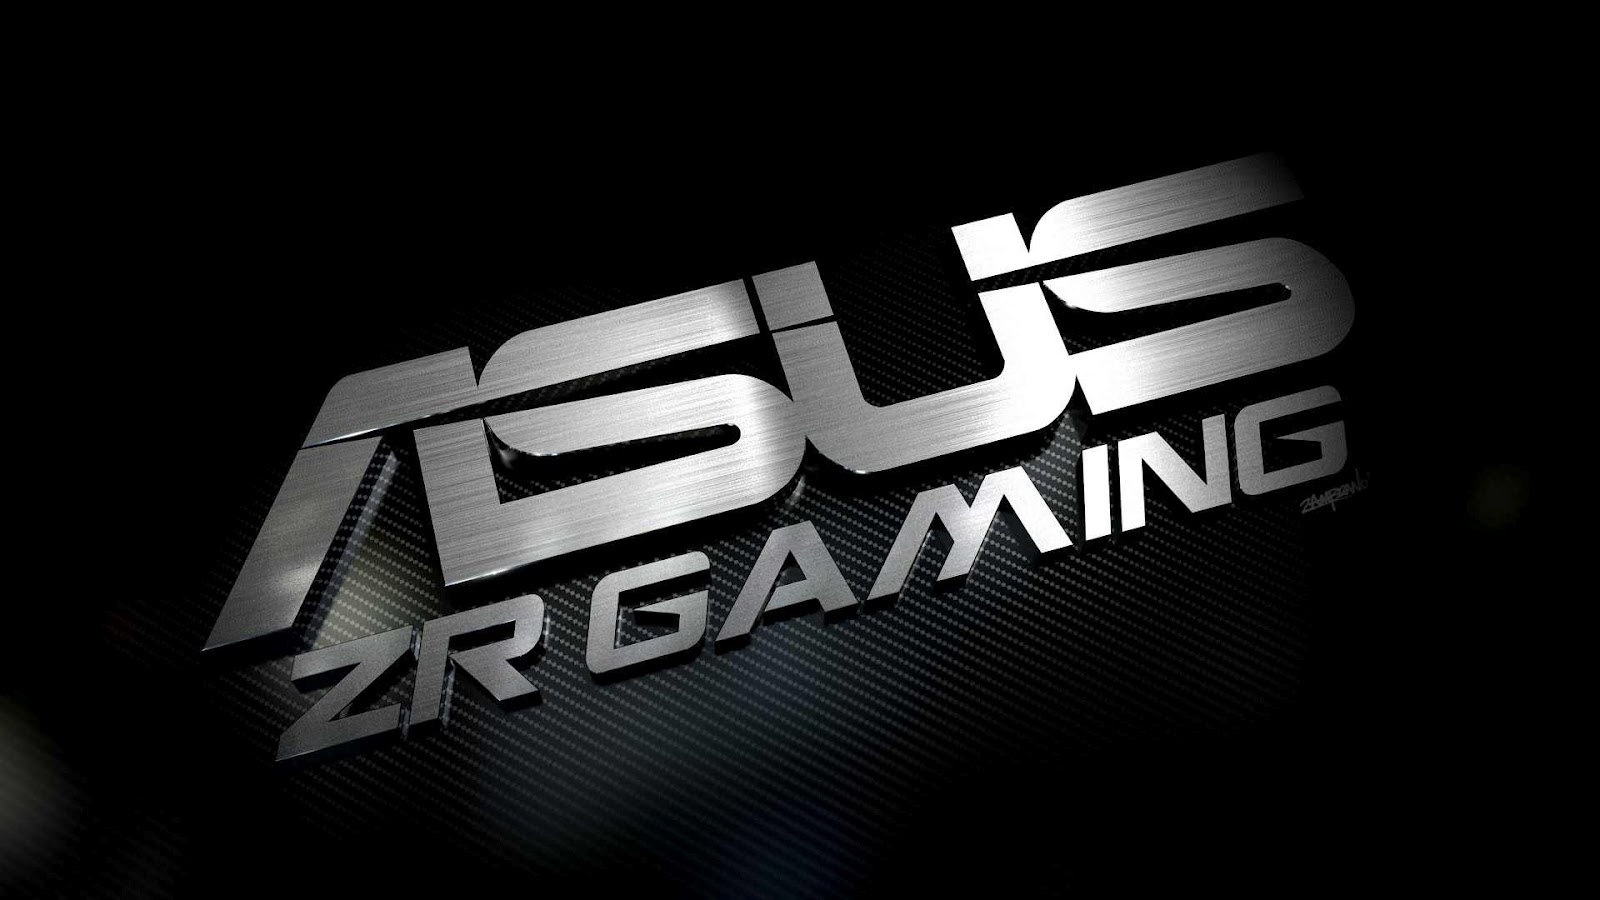 Free Hd Wallpapers Asus HD Wallpapers